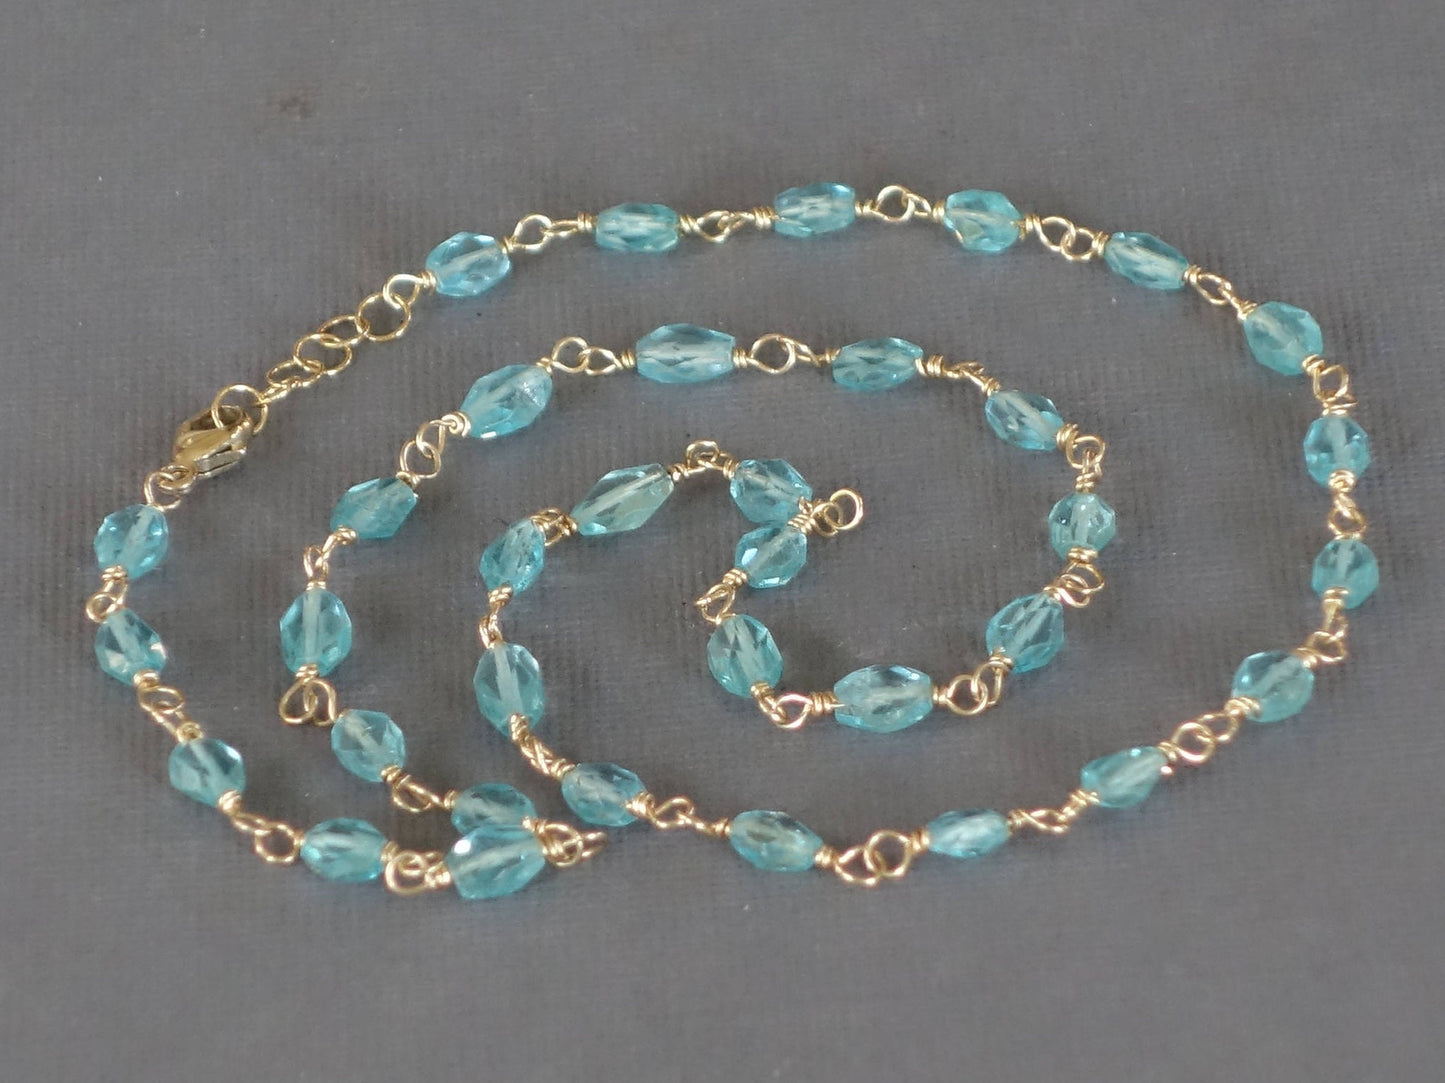 14k Gold Apatite Necklace, Wire Wrapped Apatite Necklace